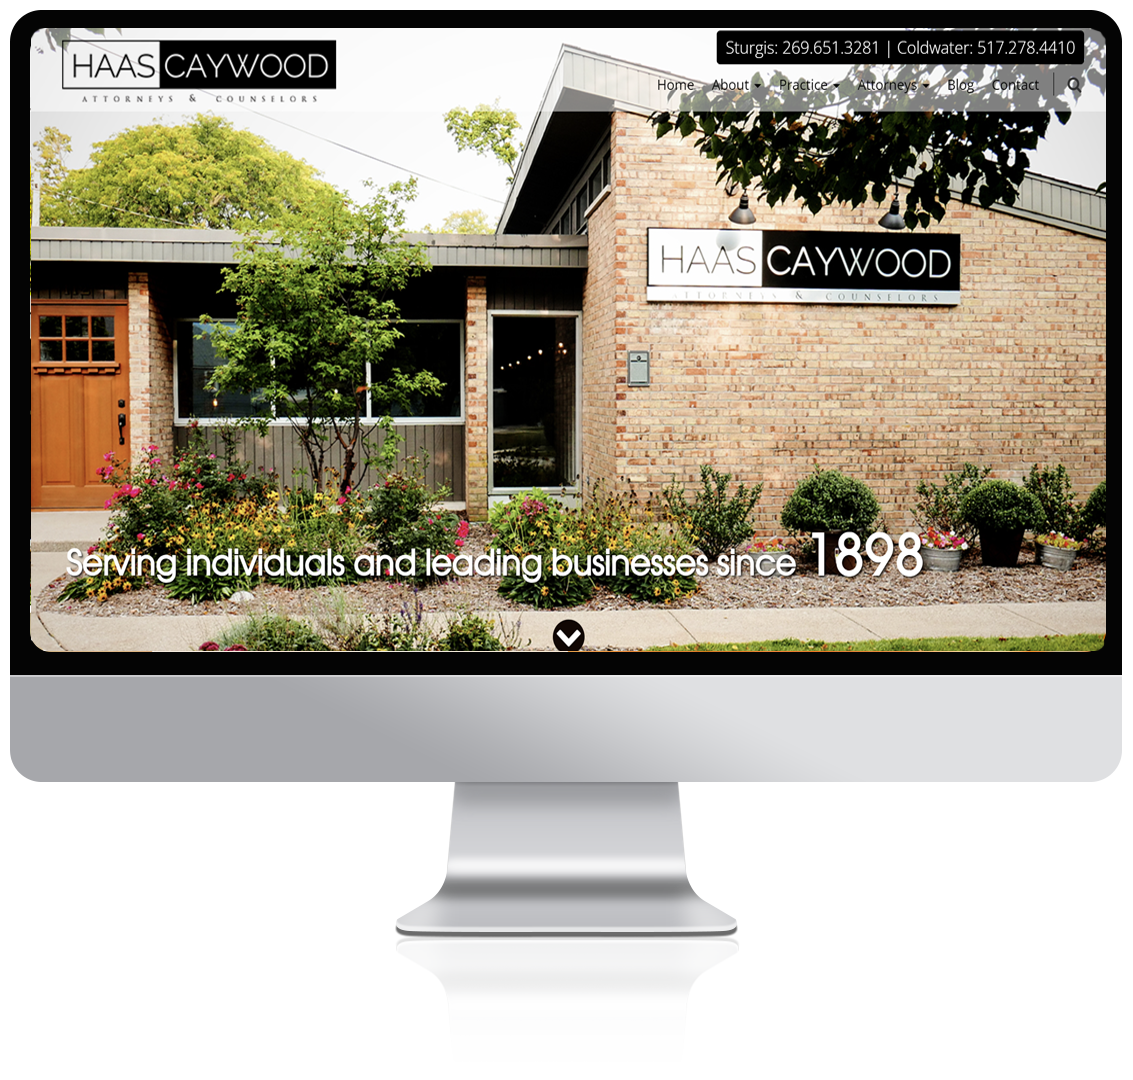 Haas Caywood home page being displayed on a computer monitor